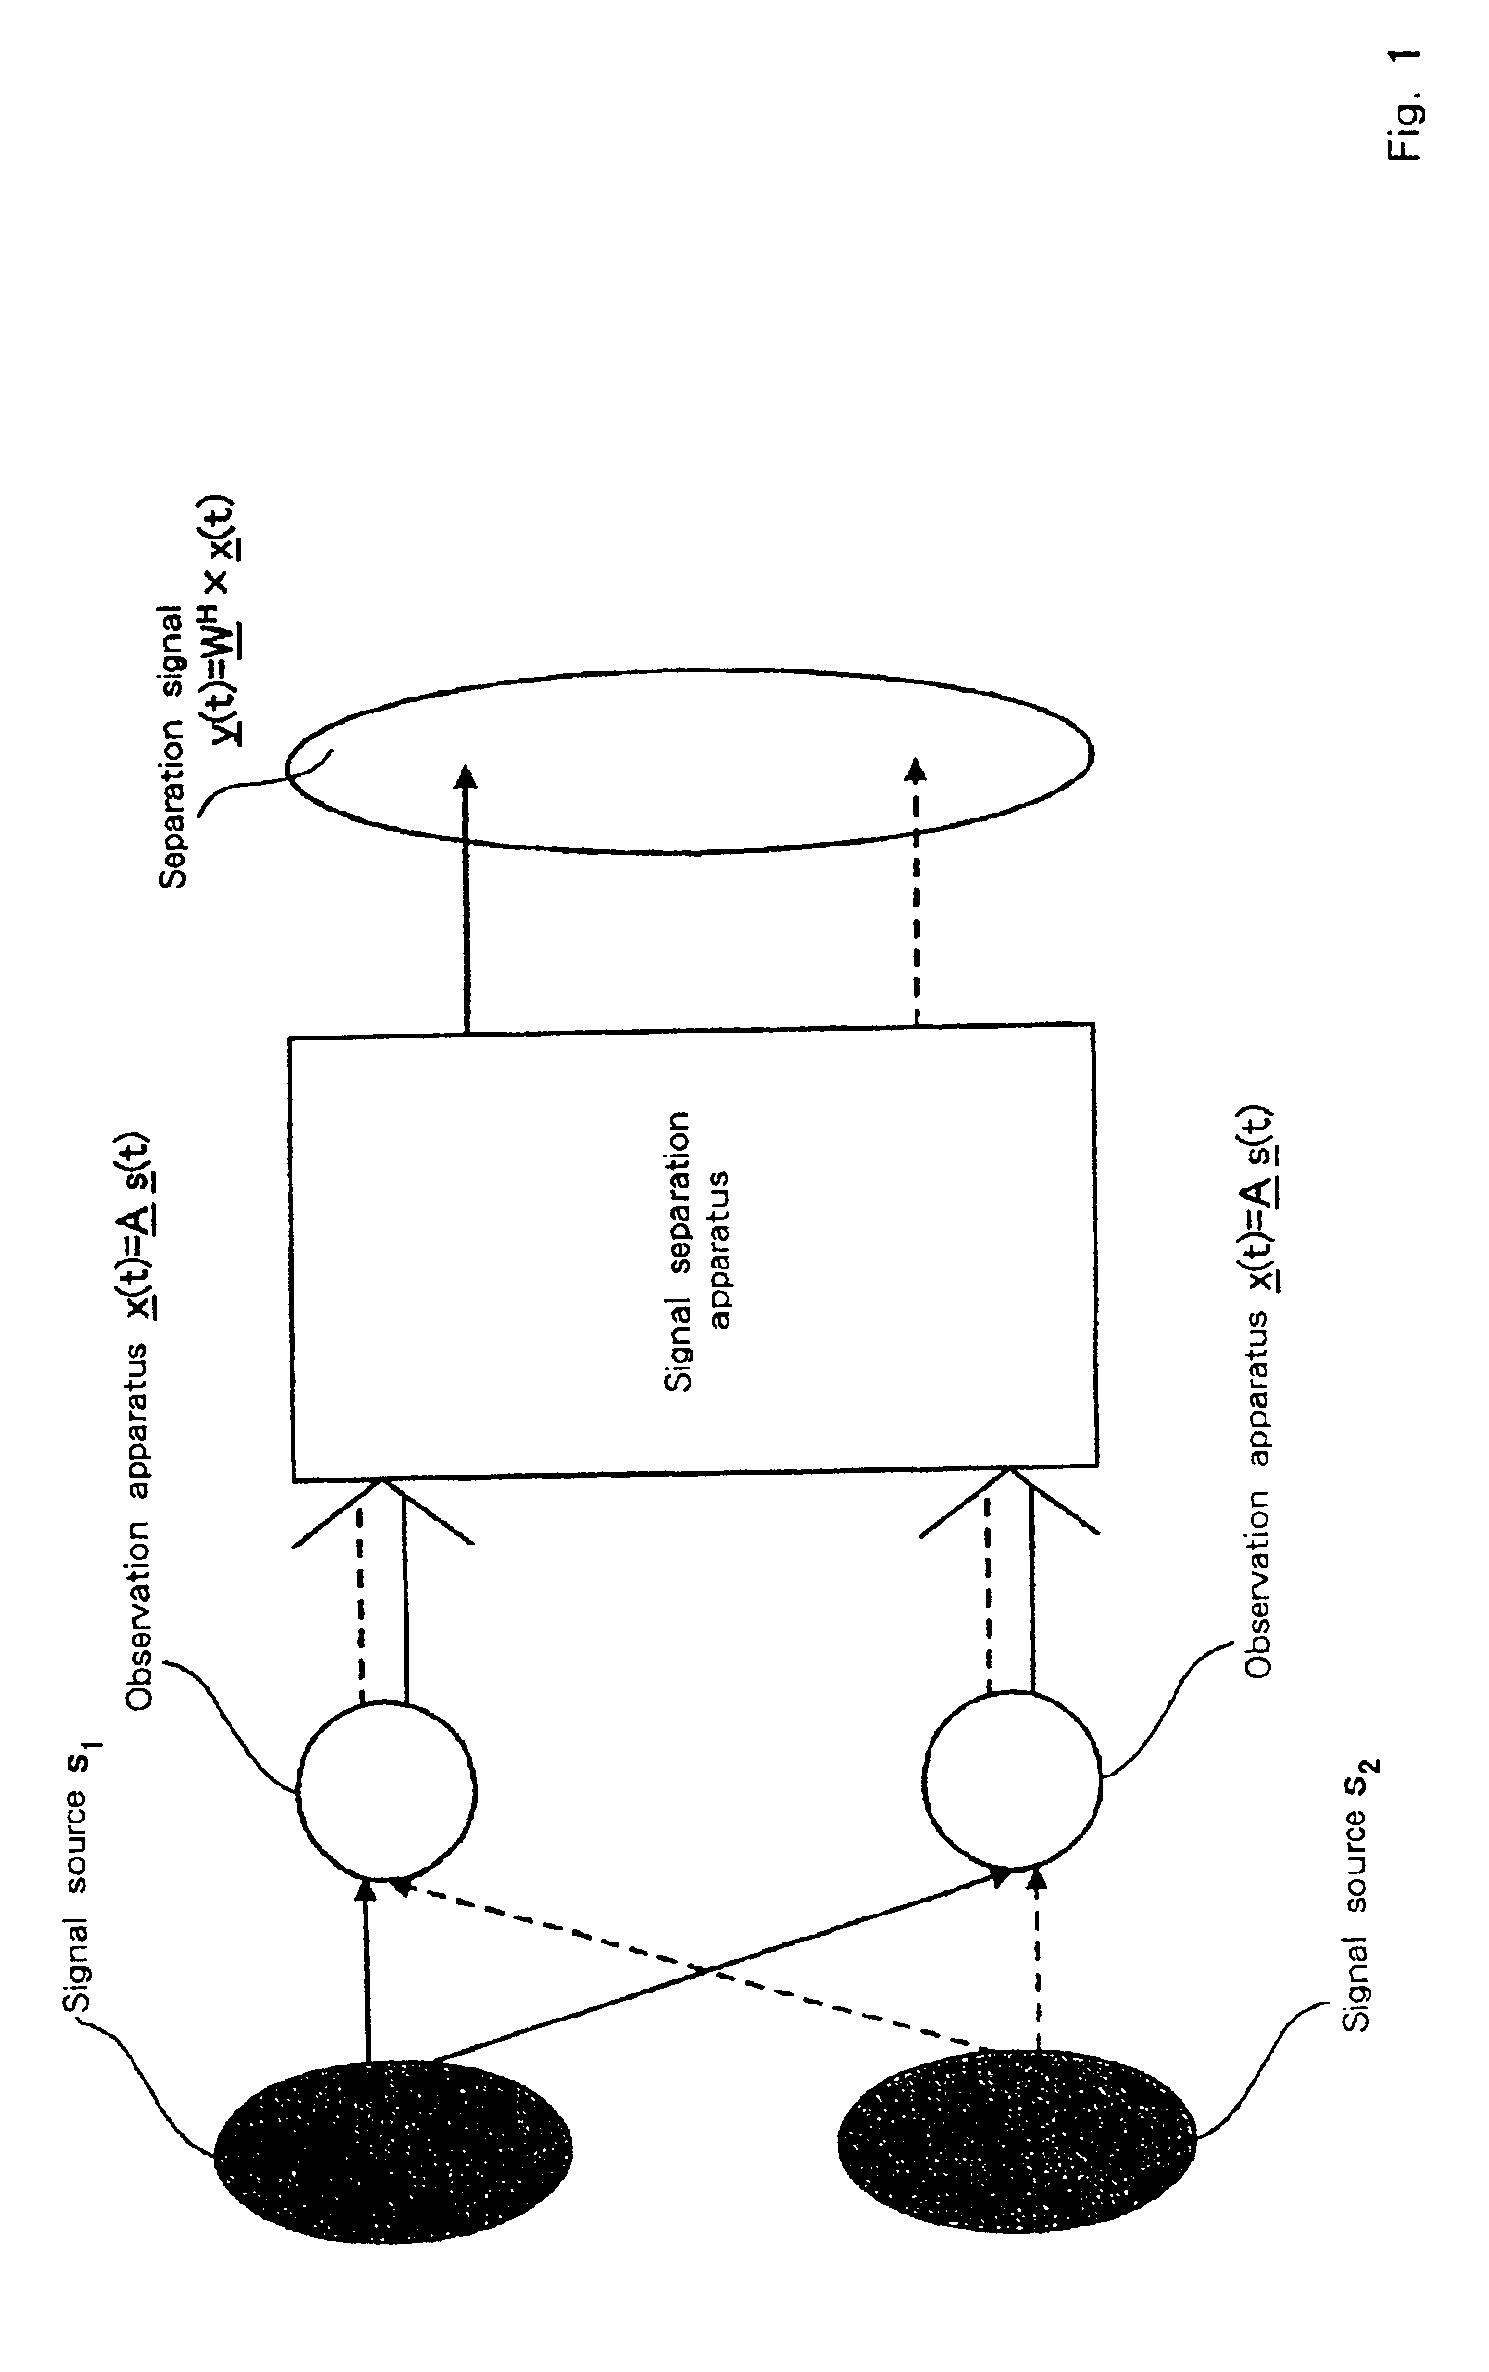 Signal separation method and apparatus for restoring original signal from observed data